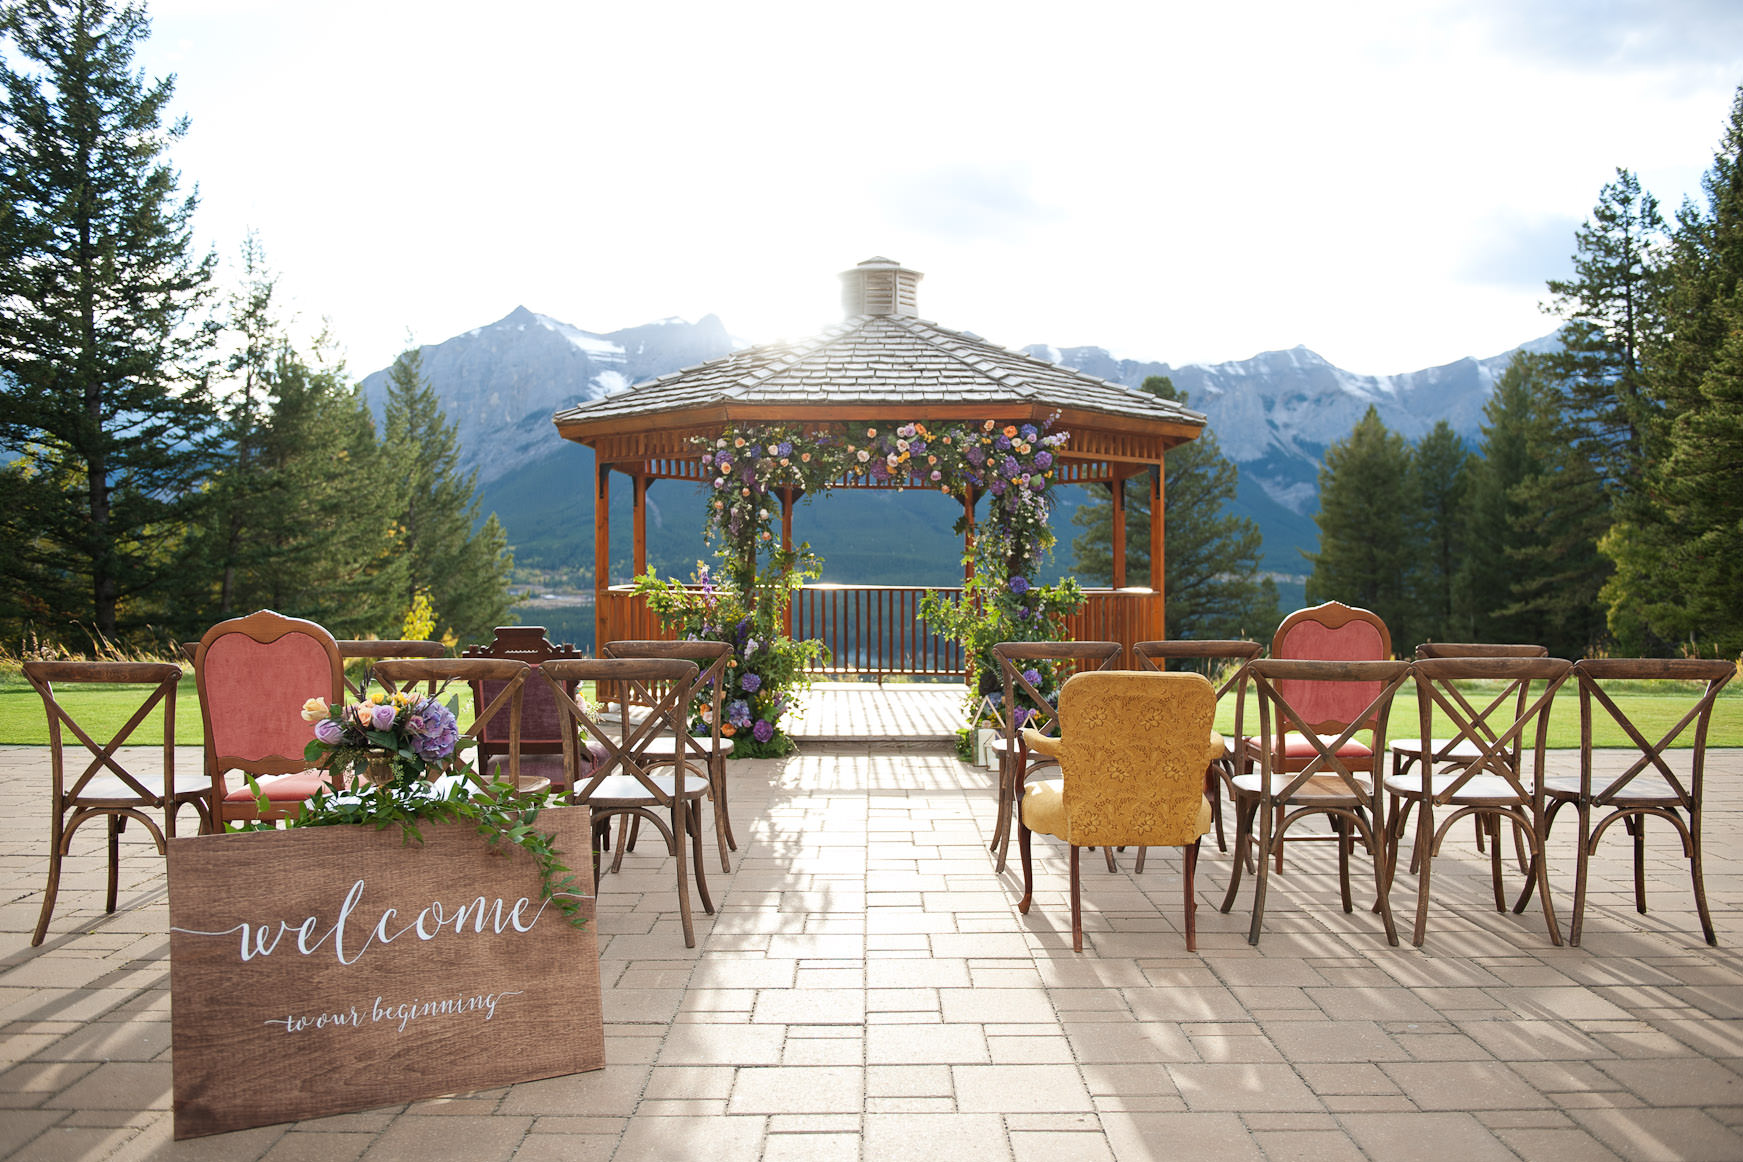 Gazebo at Silvertip is one of the best wedding venues in Calgary and the rockies